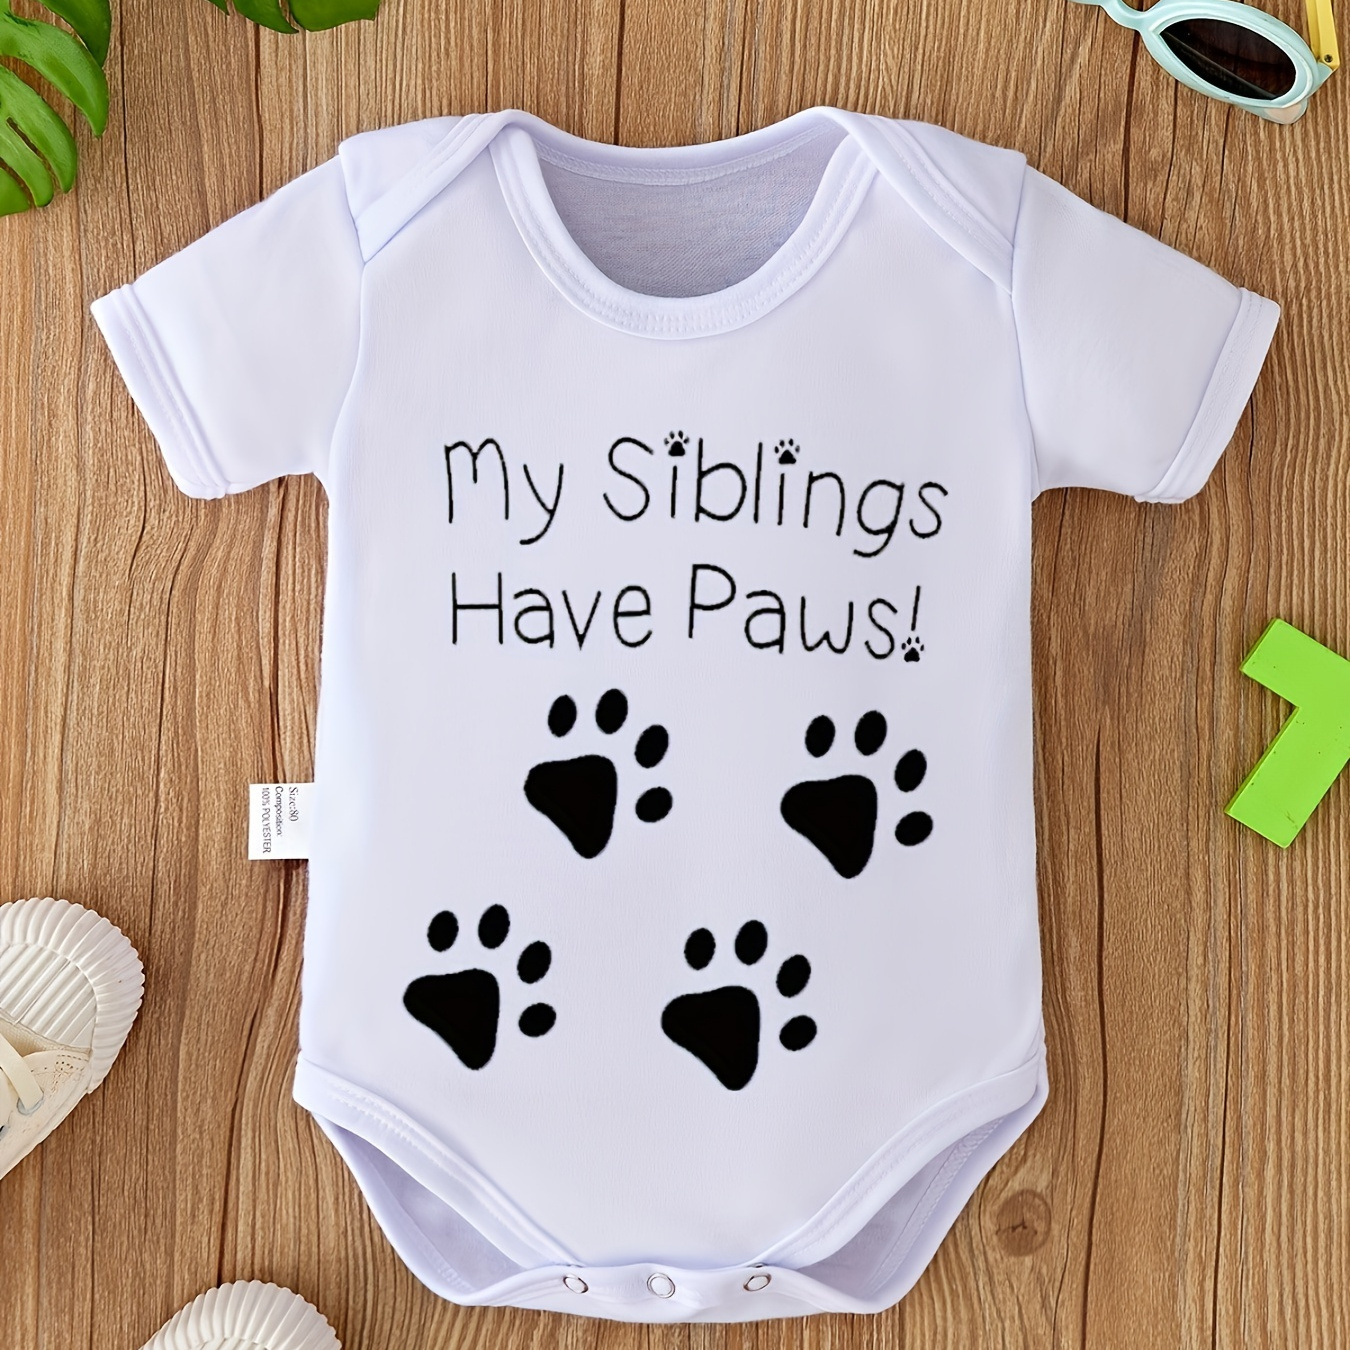 

My Siblings Have Paws " Pattern & Letter Print Baby Triangle Romper, Newborn Baby Bodysuit Soft Comfortable Pregnancy Gift